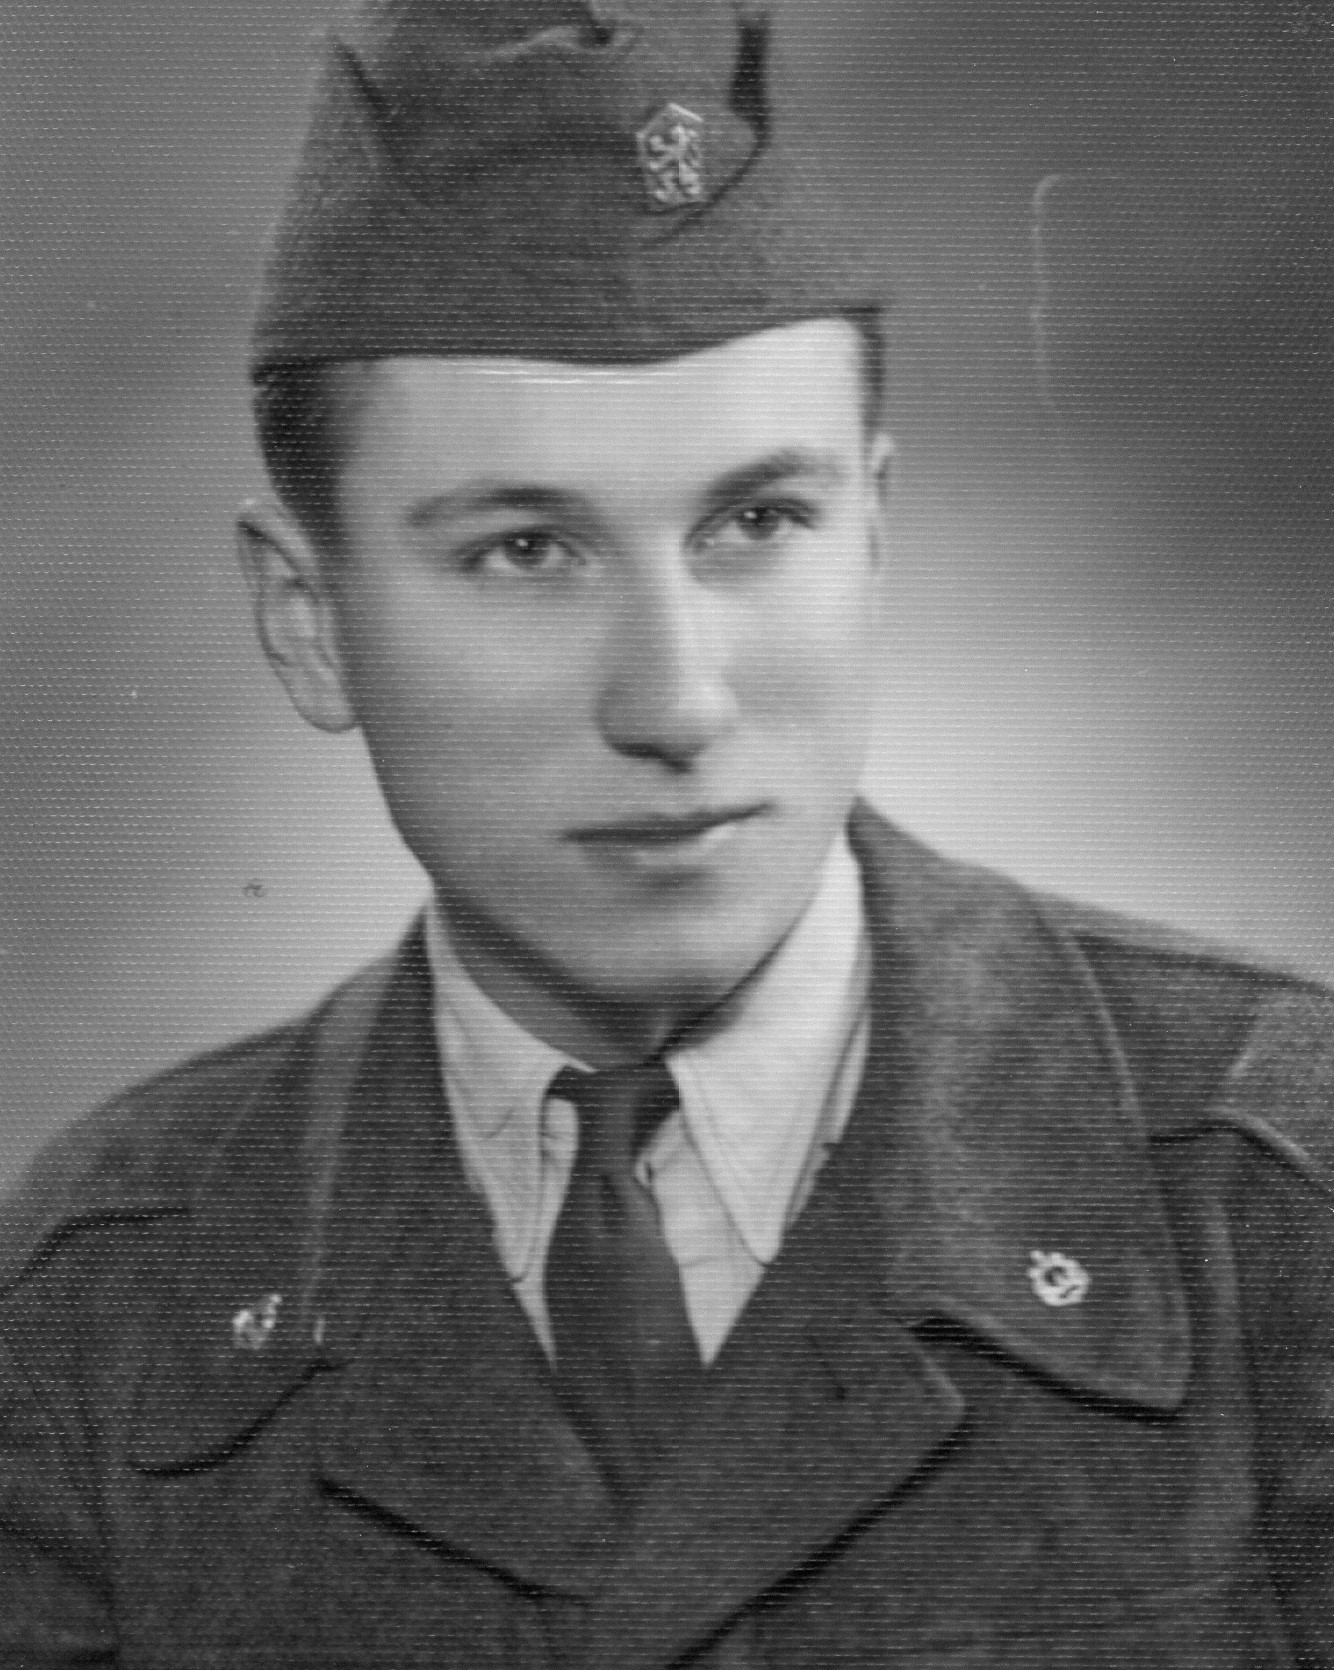 The witness during his military service, Terezín, 1964